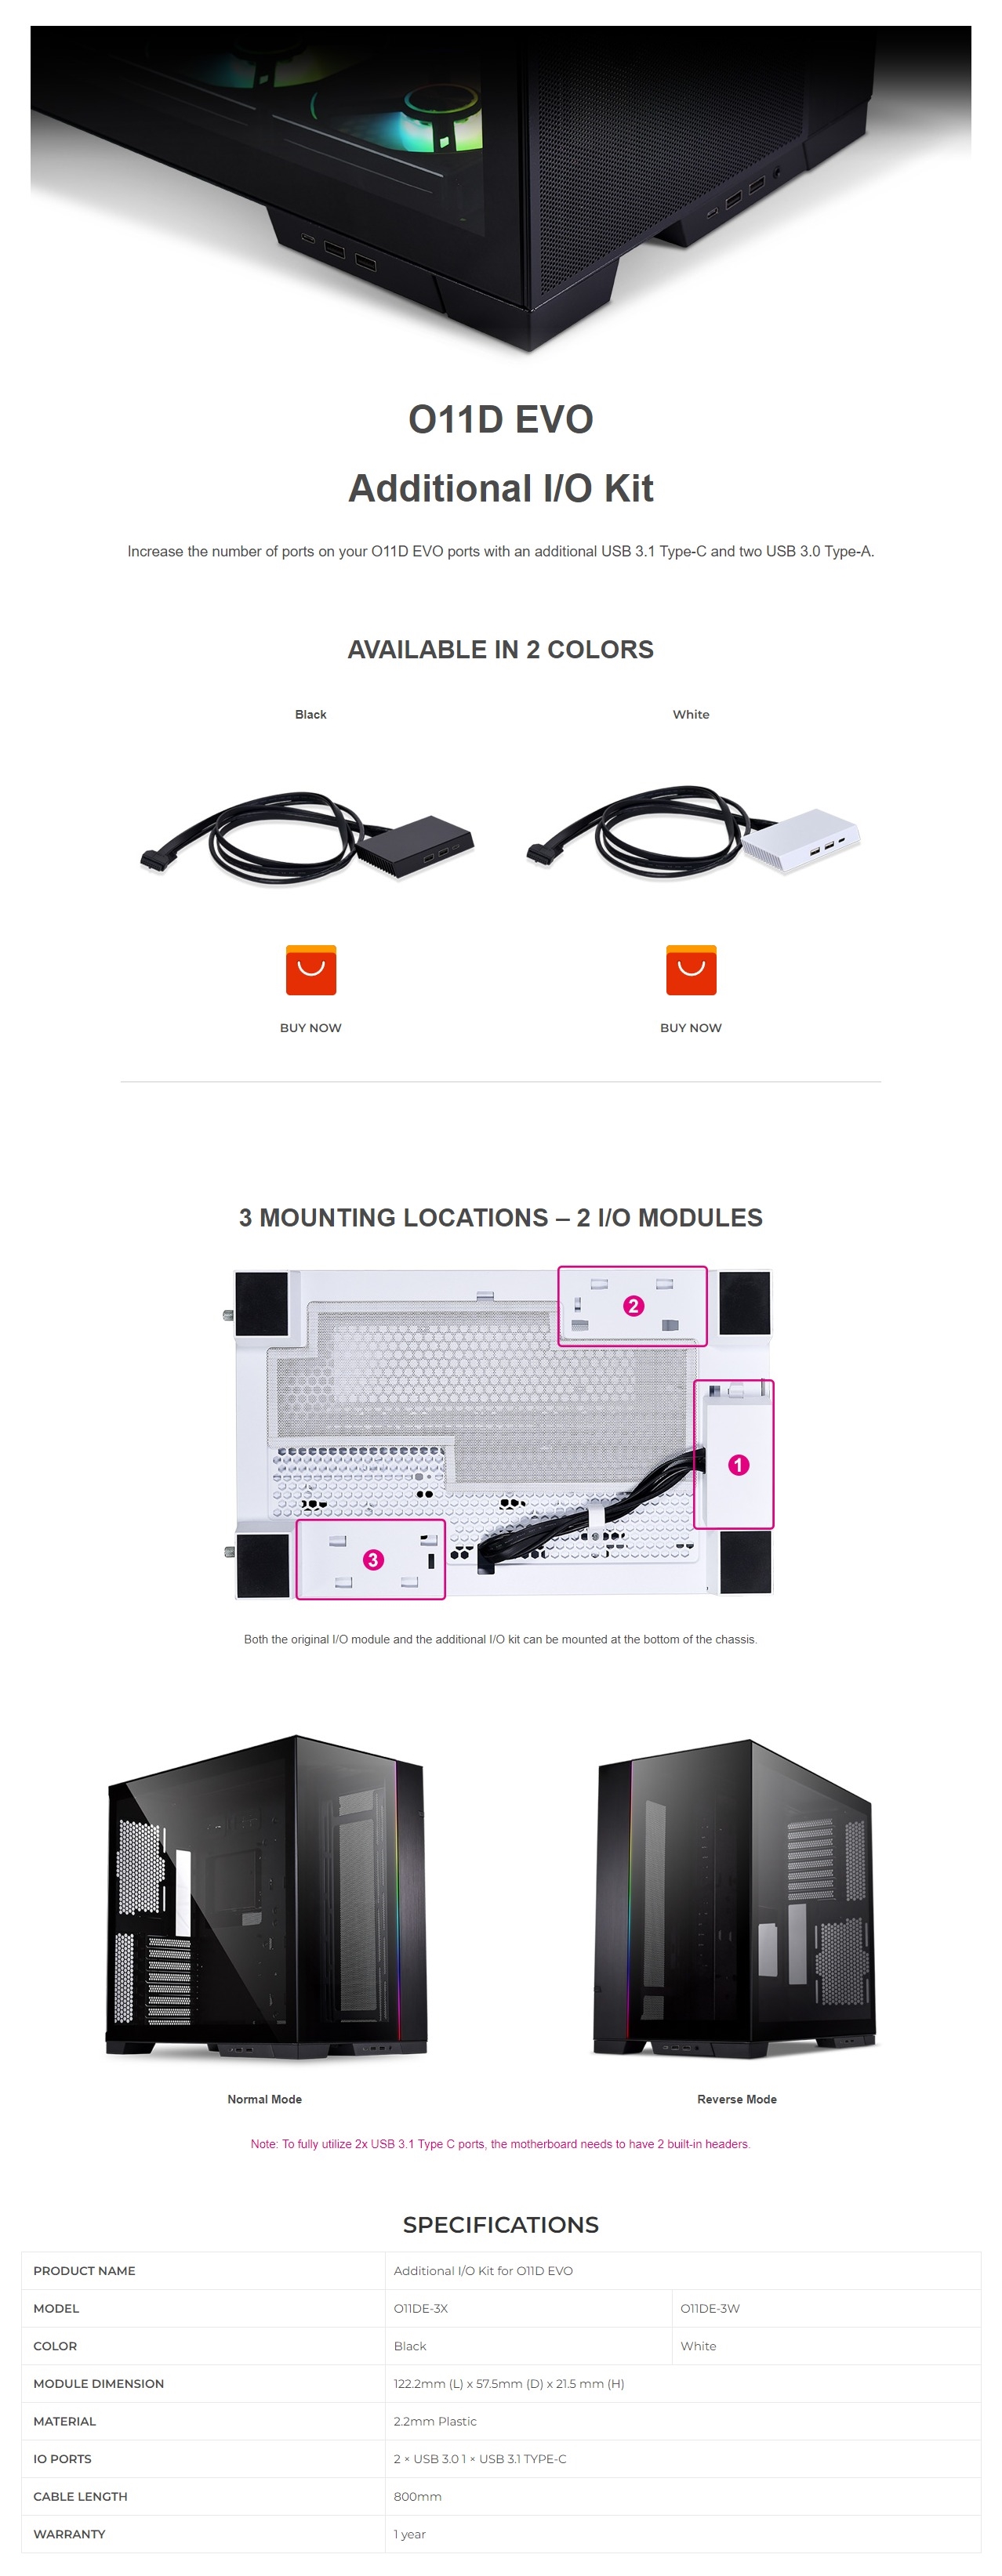 A large marketing image providing additional information about the product Lian Li O11D EVO Additional Kit I/O Kit - Black - Additional alt info not provided